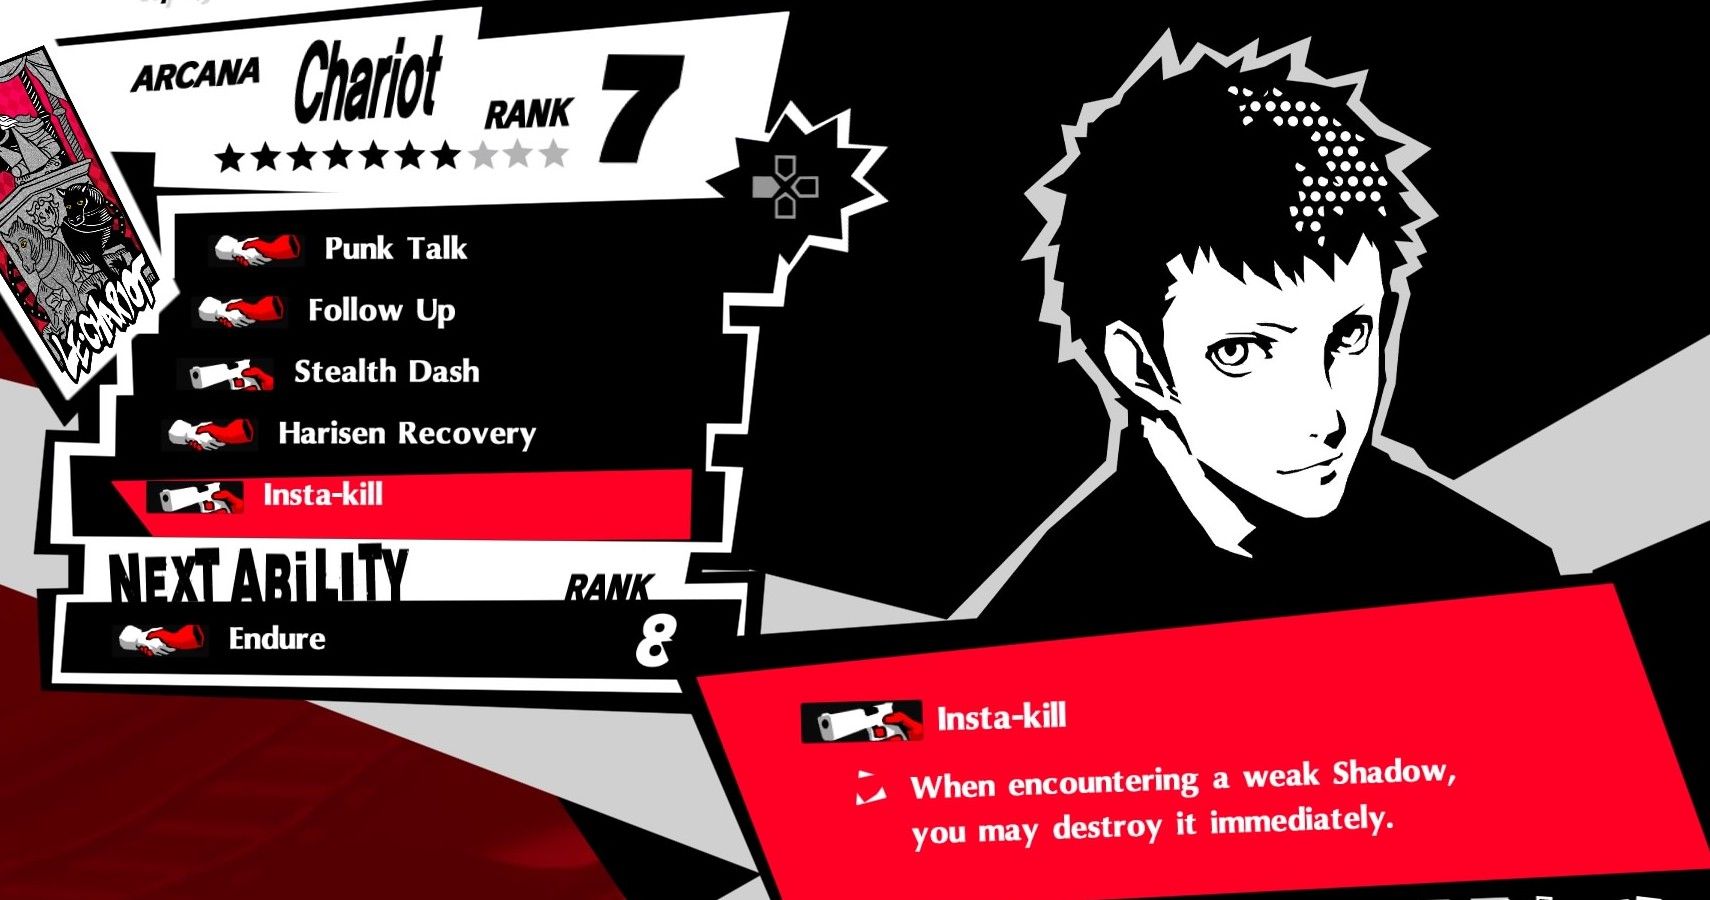 Persona 5 Confidant list, rank requirements and romance options - Polygon